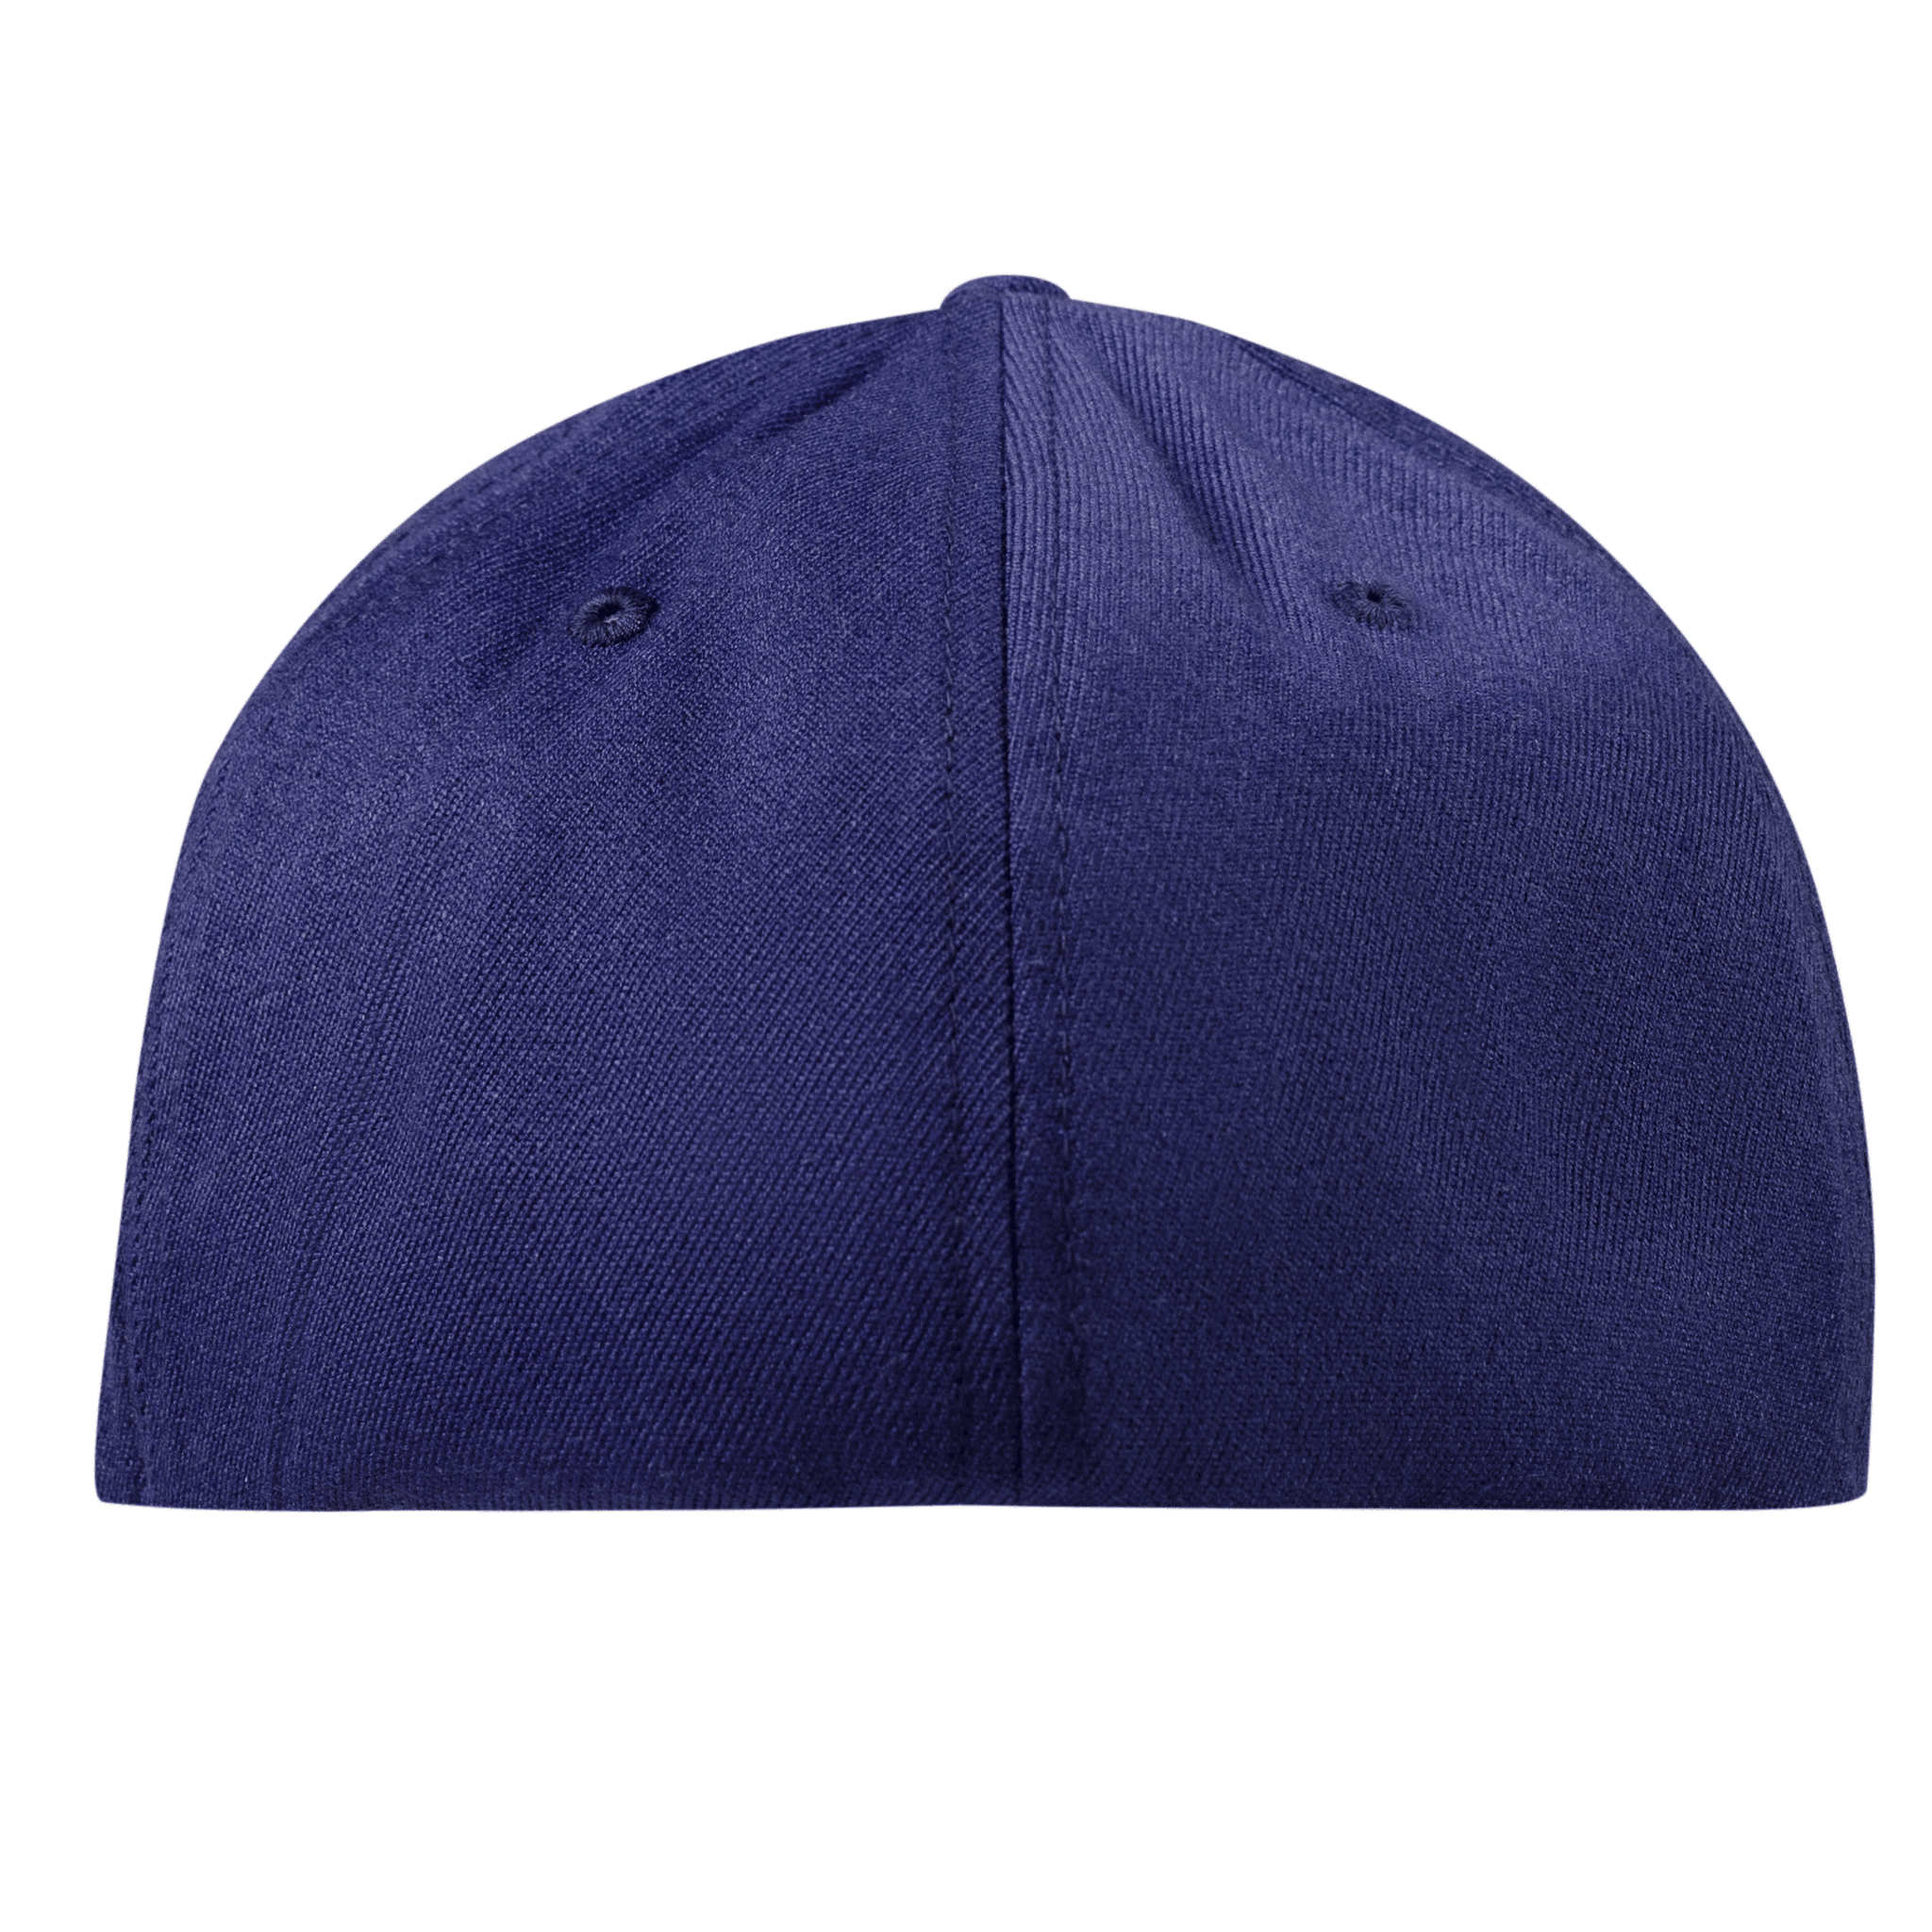 Colorado 38 PVC Flexfit Fitted Back Navy